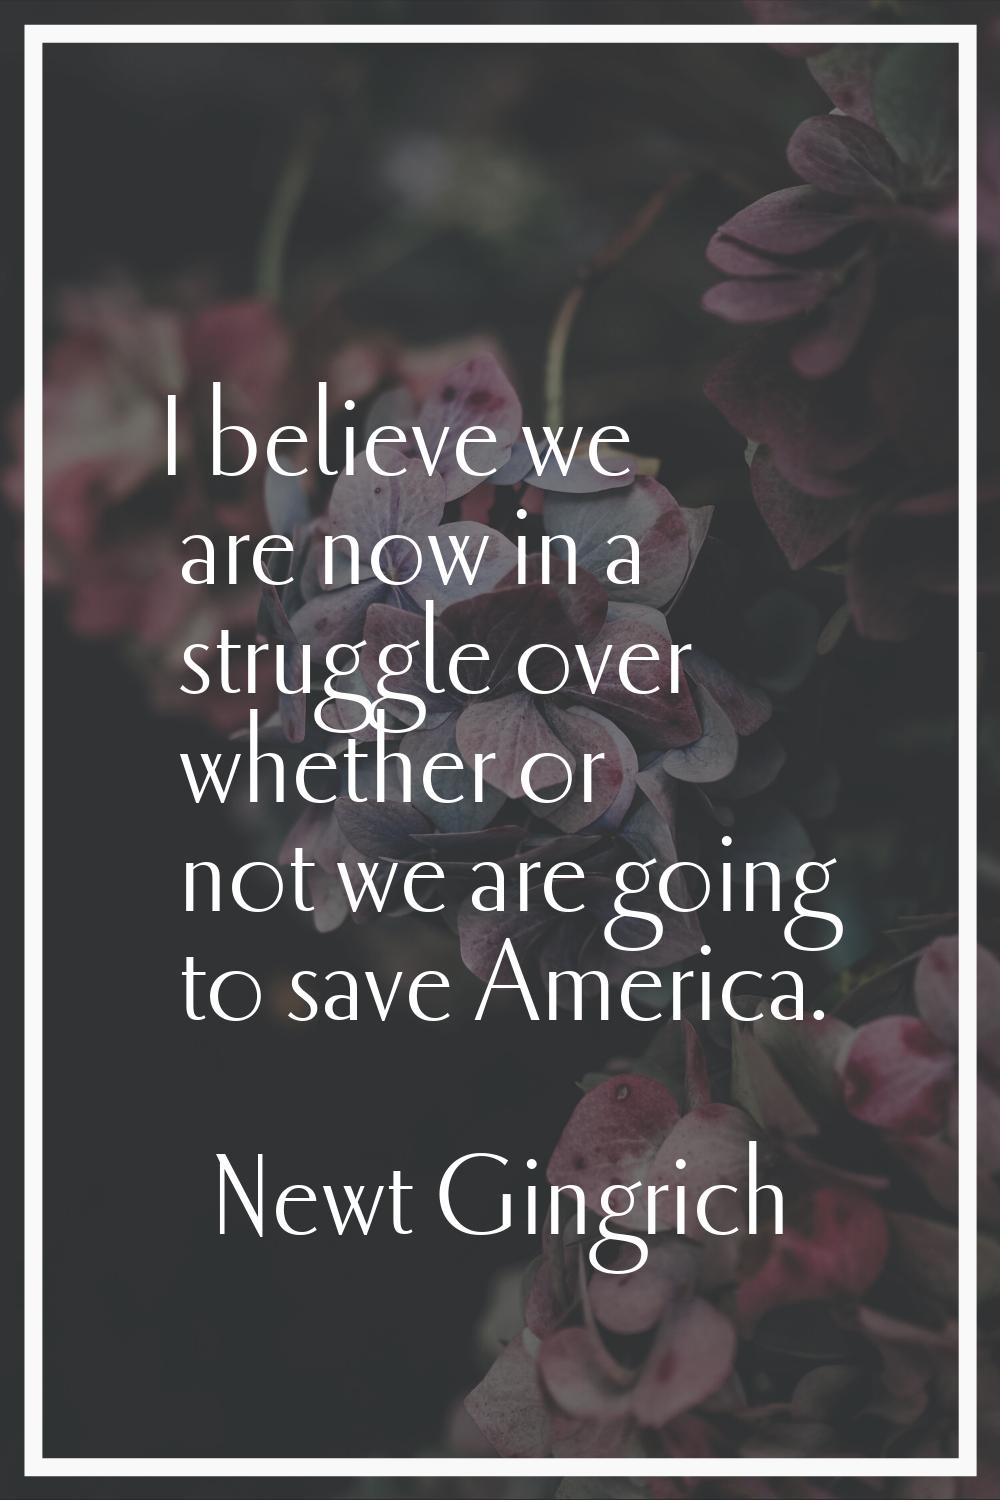 I believe we are now in a struggle over whether or not we are going to save America.